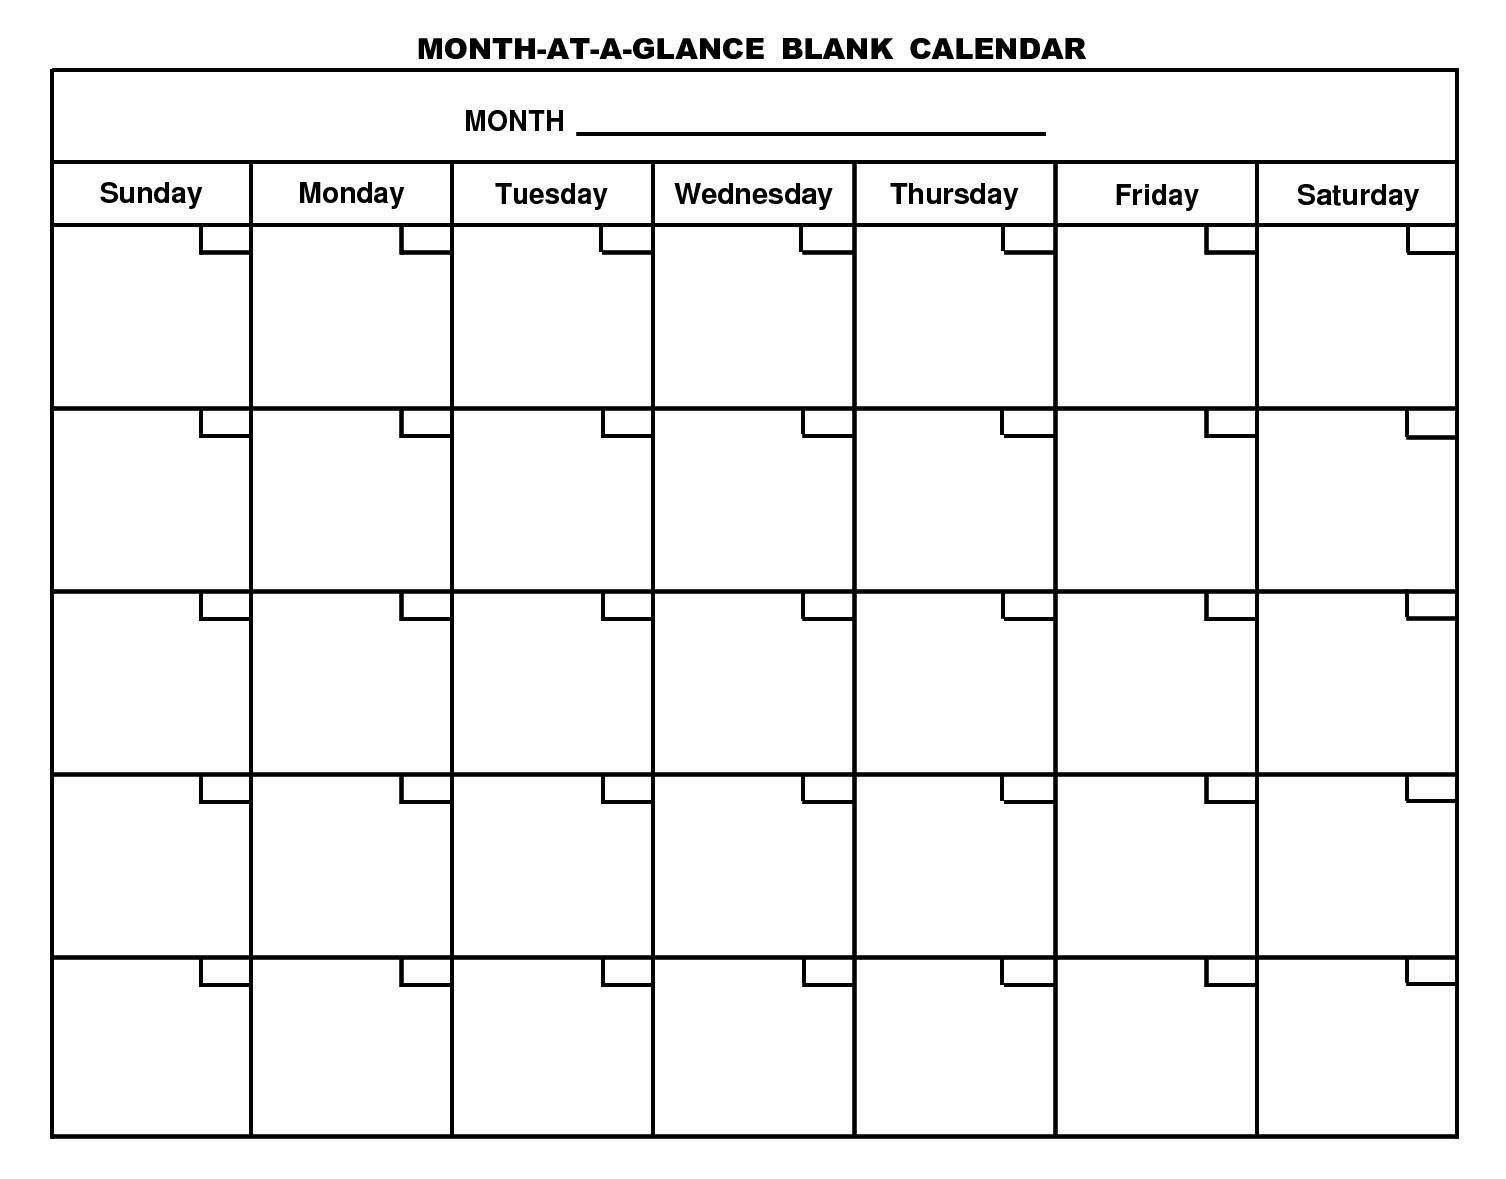 Month At A Glance Blank Calendar | Monthly Printable Calender-Month At A Glance Blank Calendar